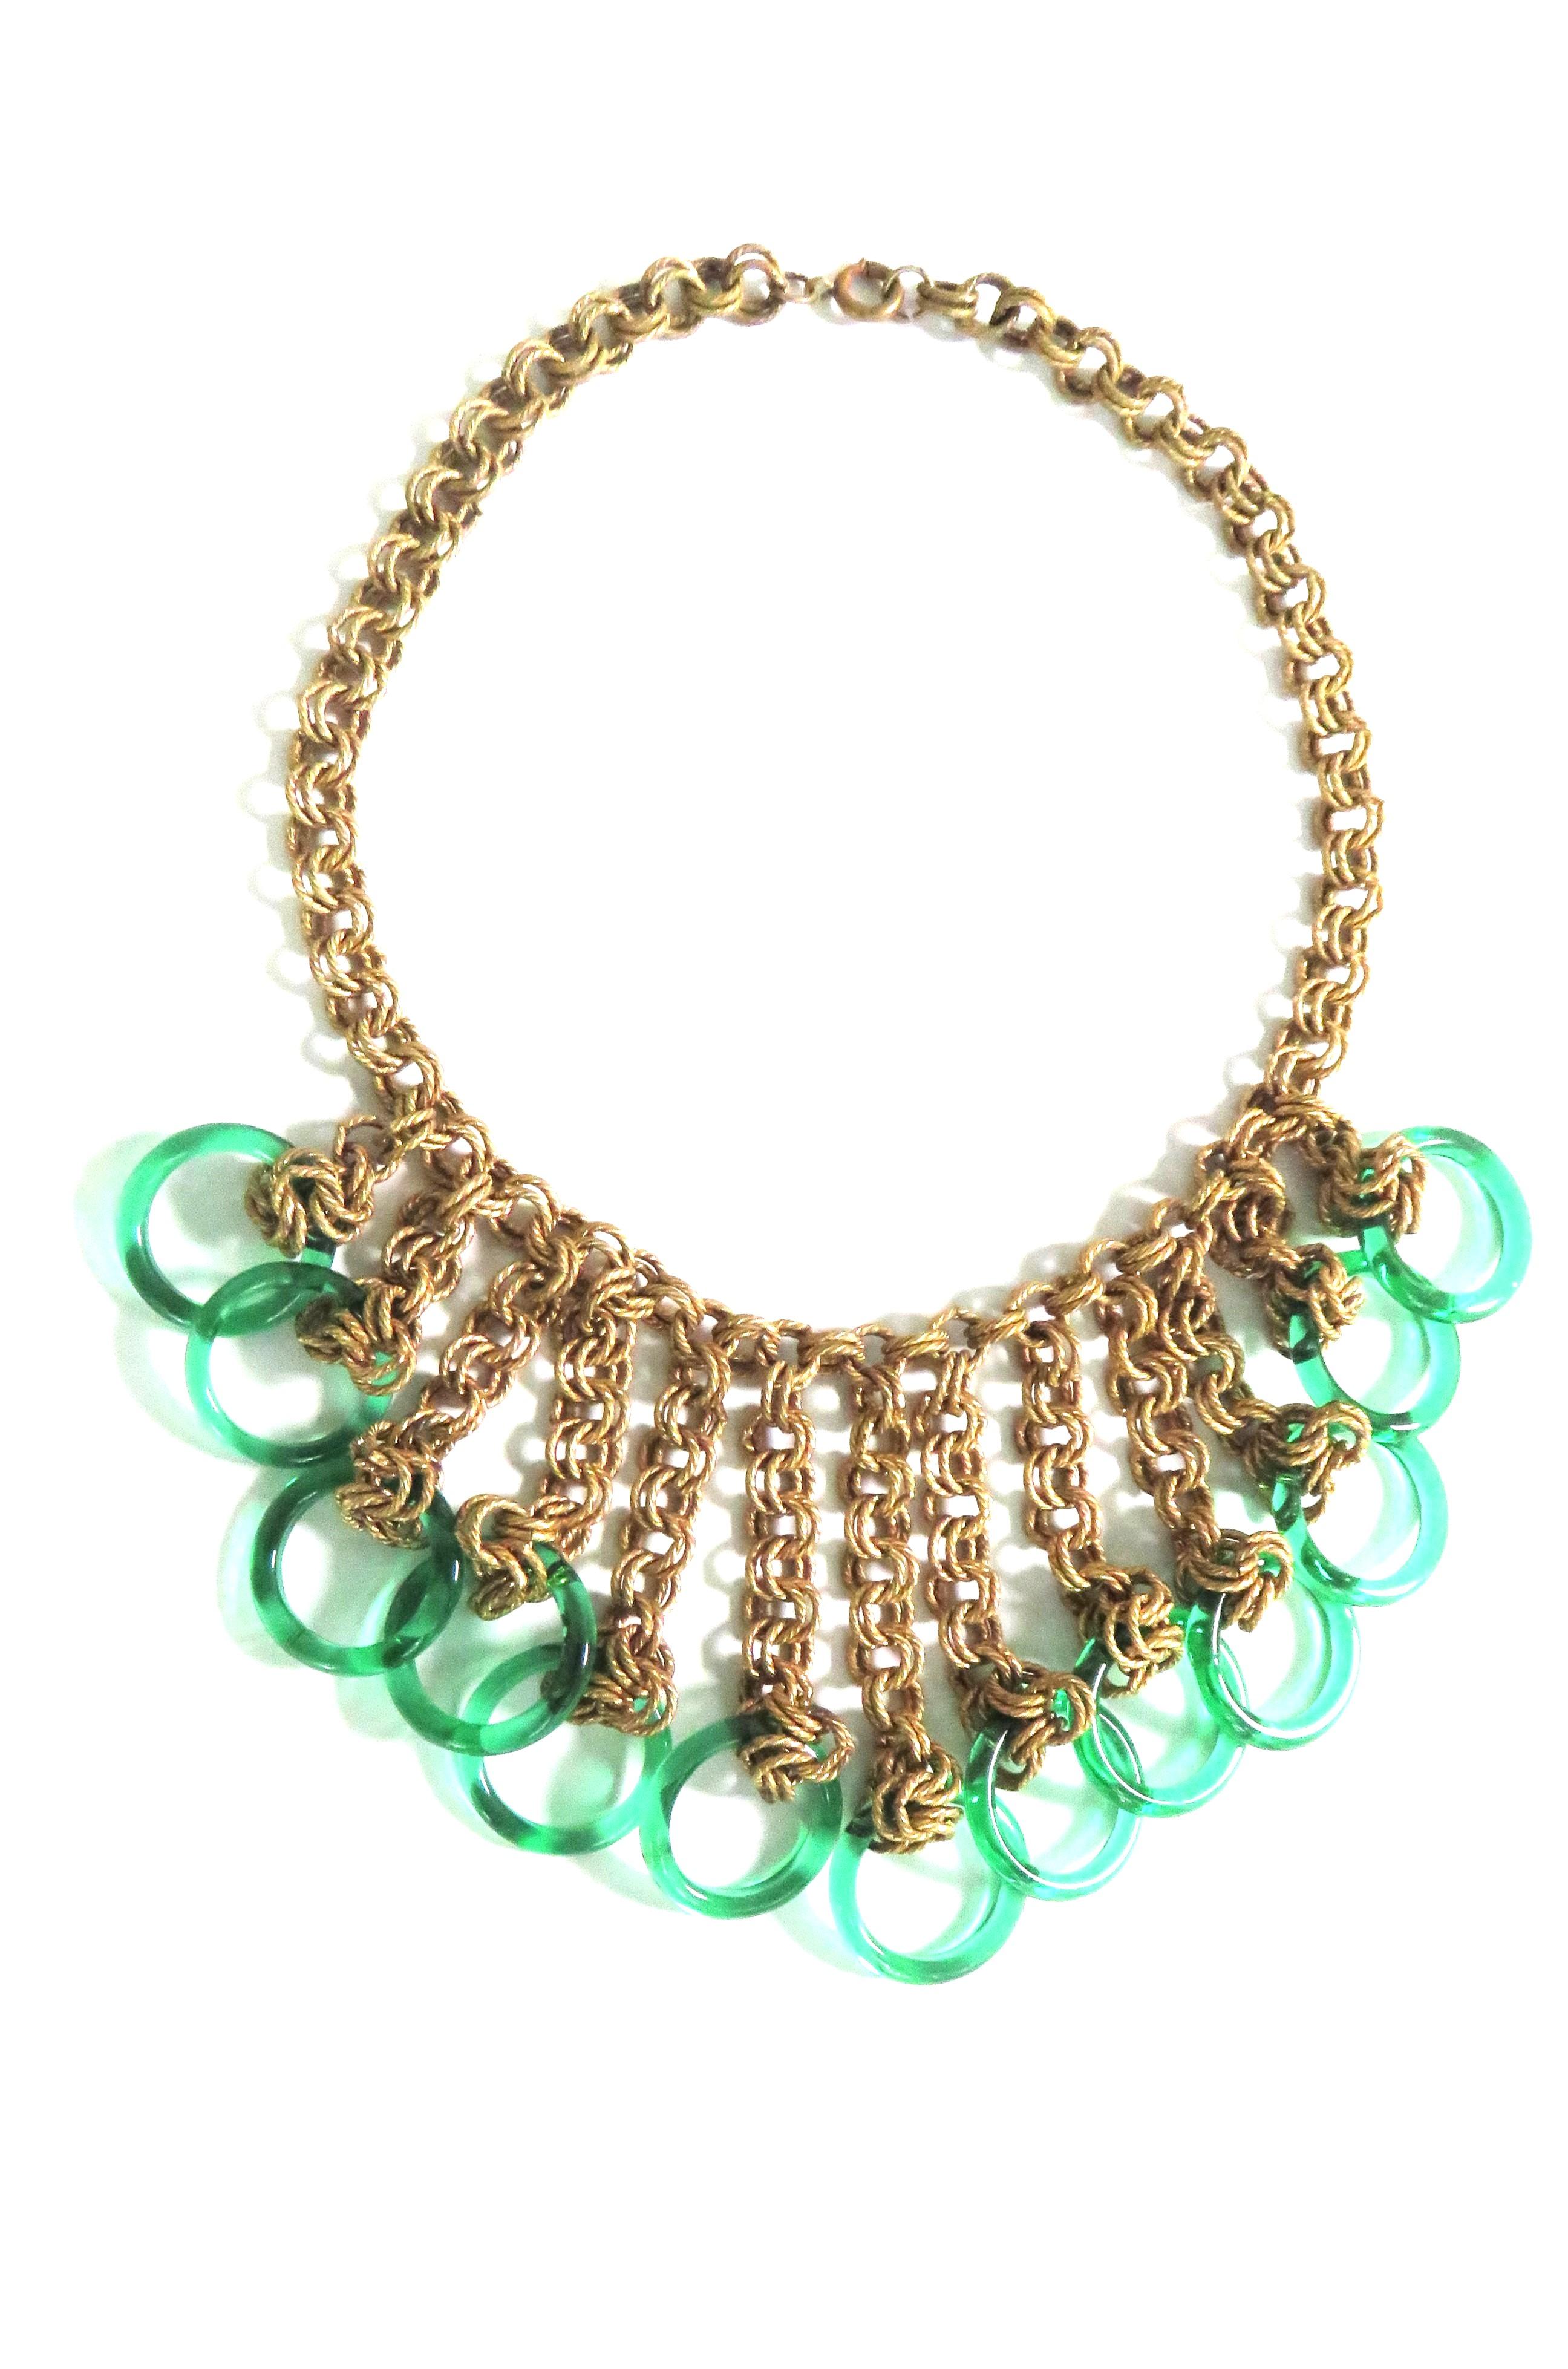 Chain Bib 1940s Necklace with Green Glass Circles For Sale 7